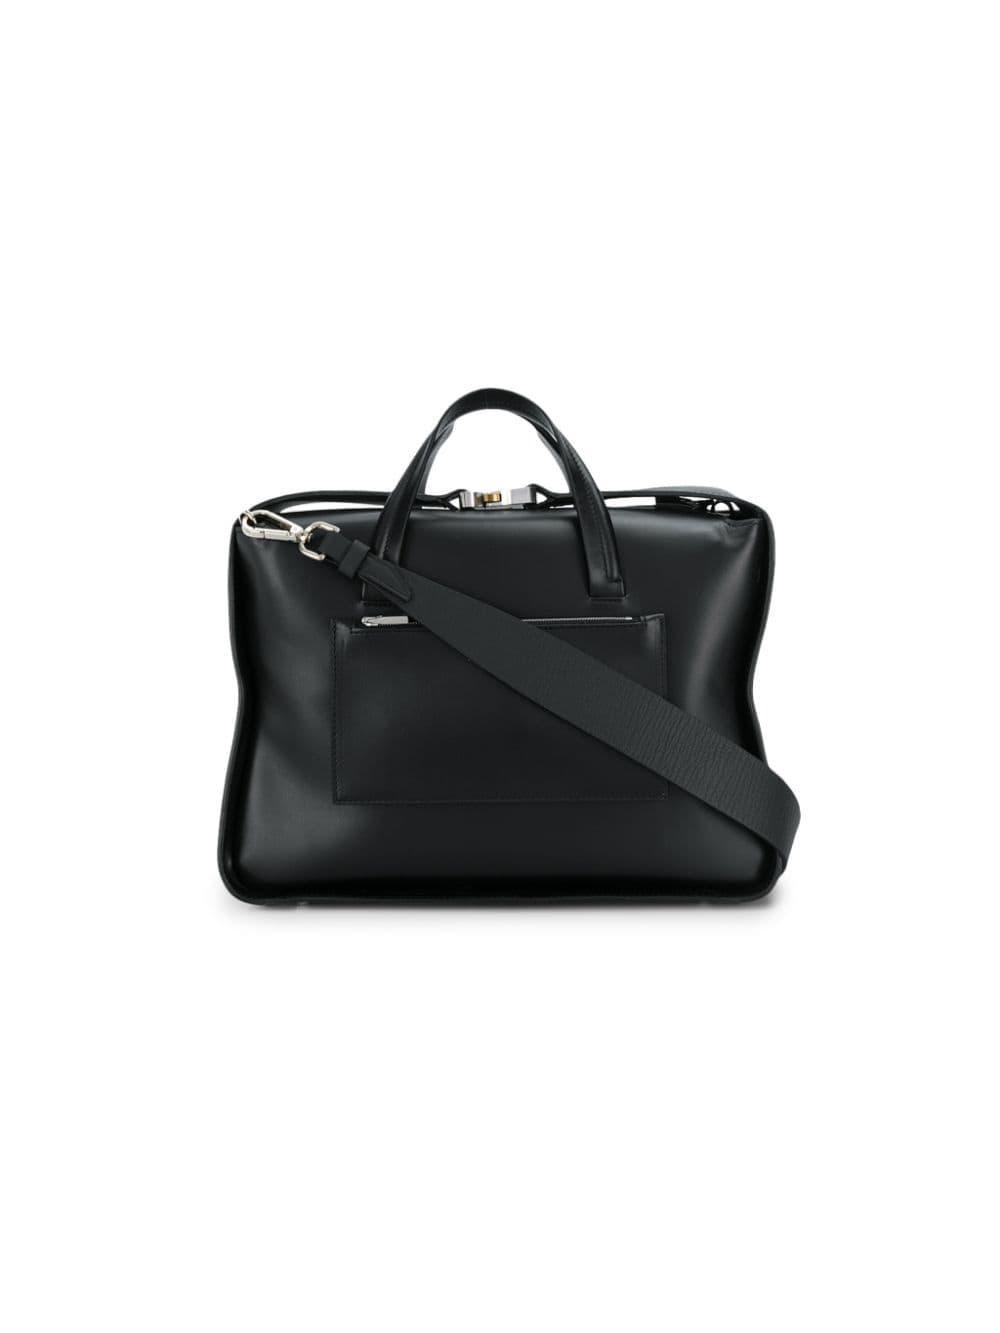 1017 ALYX 9SM Boxy Leather Tote in Black - Save 20% - Lyst